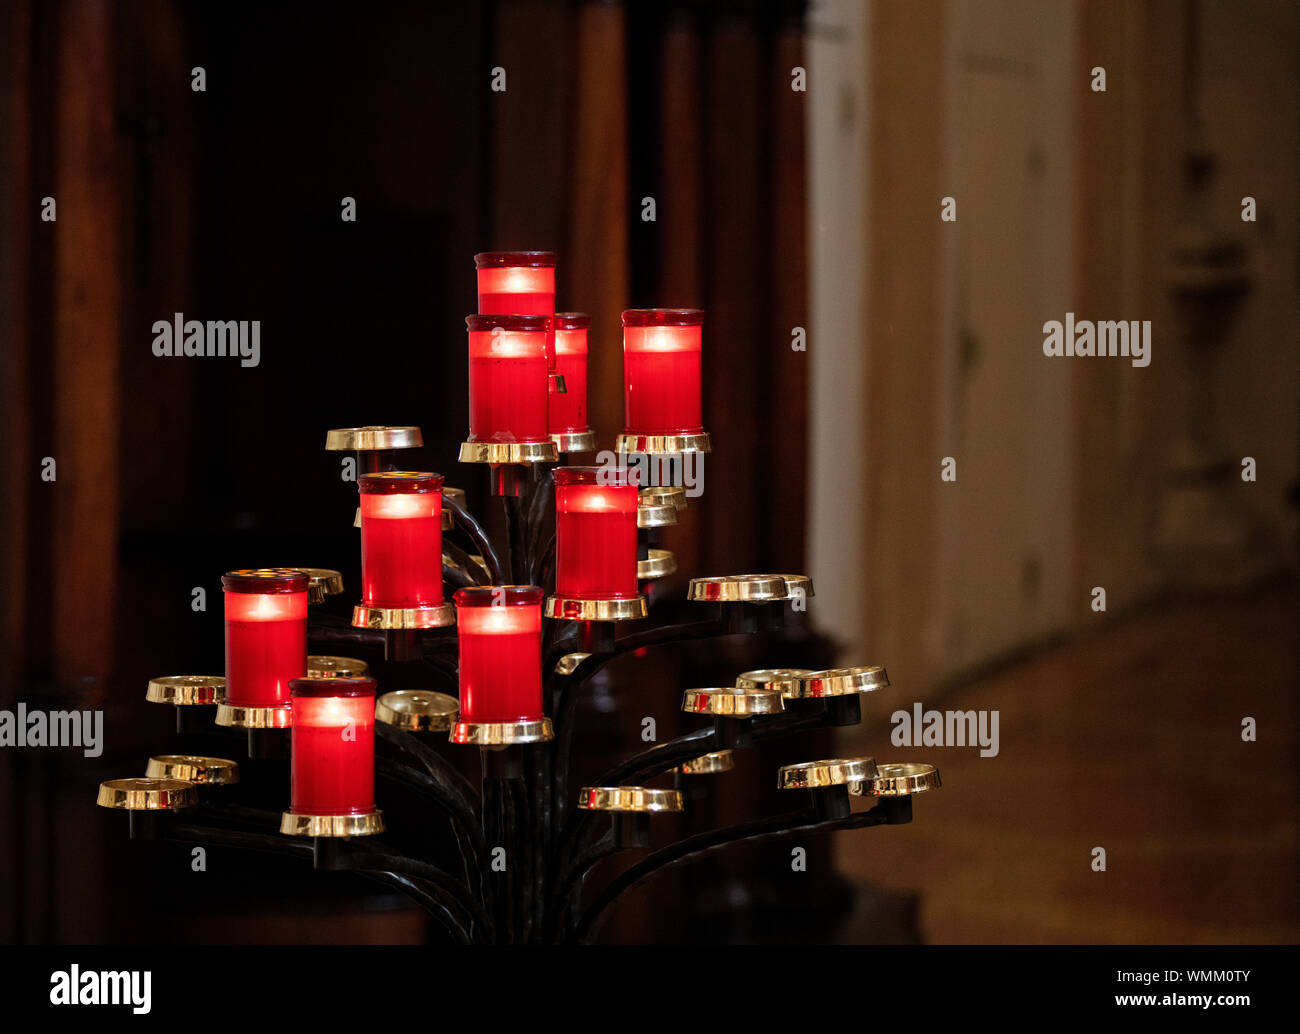 Red candles on a pyramid stand inside a building. Some of the candleholders are empty and some have lit candles in them. Stock Photo